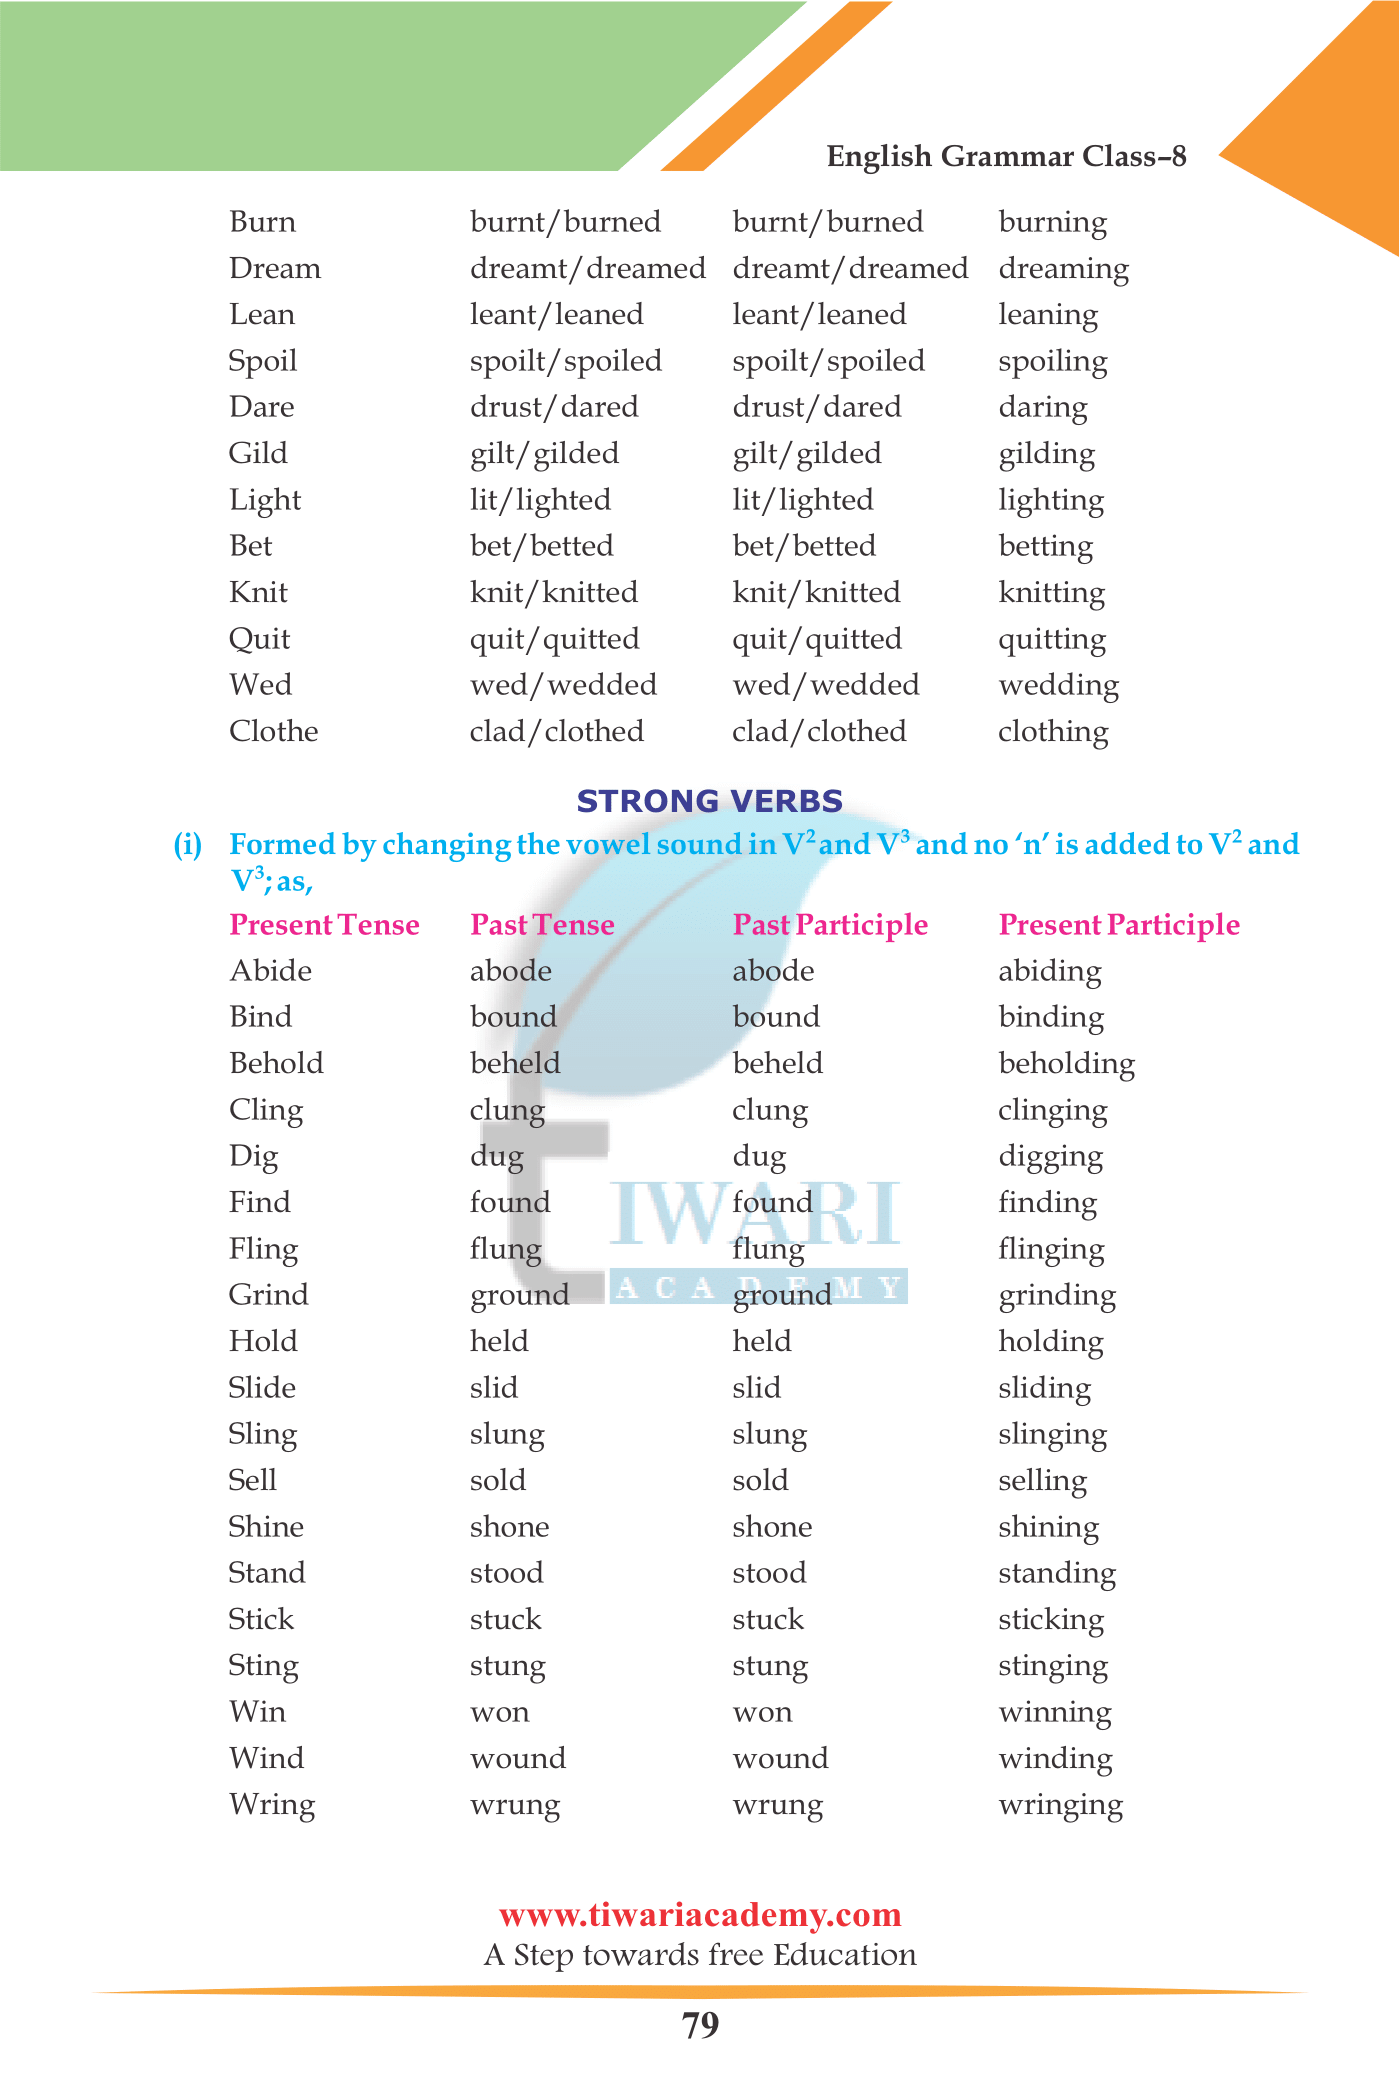 Auxiliaries and Verbs of incomplete Predication.